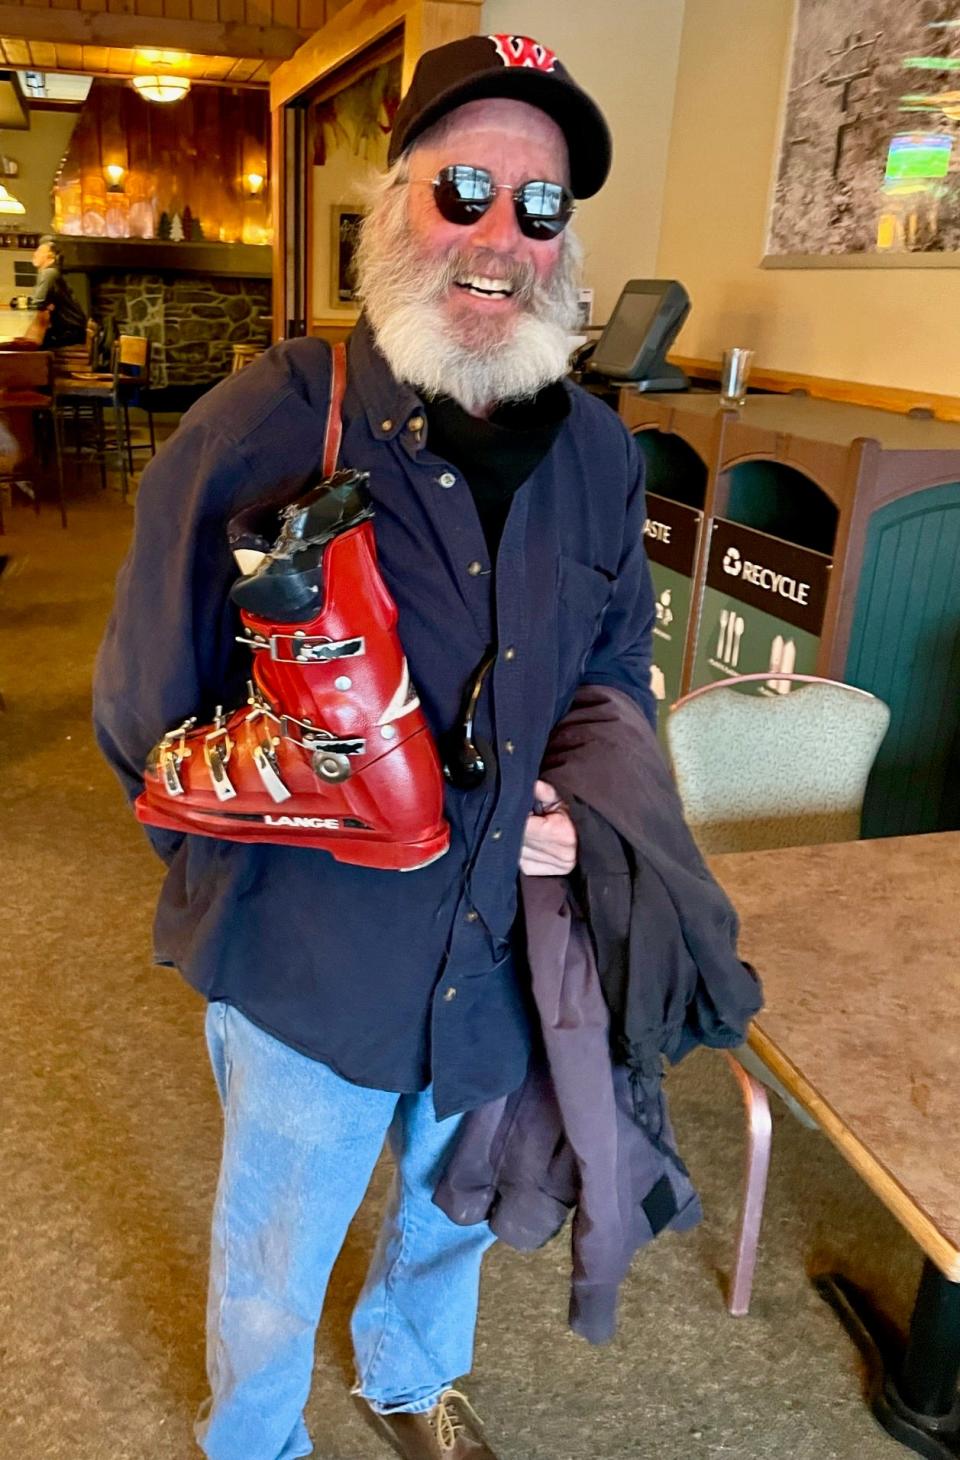 With his unique look and daily dedication to hitting the slopes at Wachusett Mountain, Dave Burwick has been a guru to area skiiers.